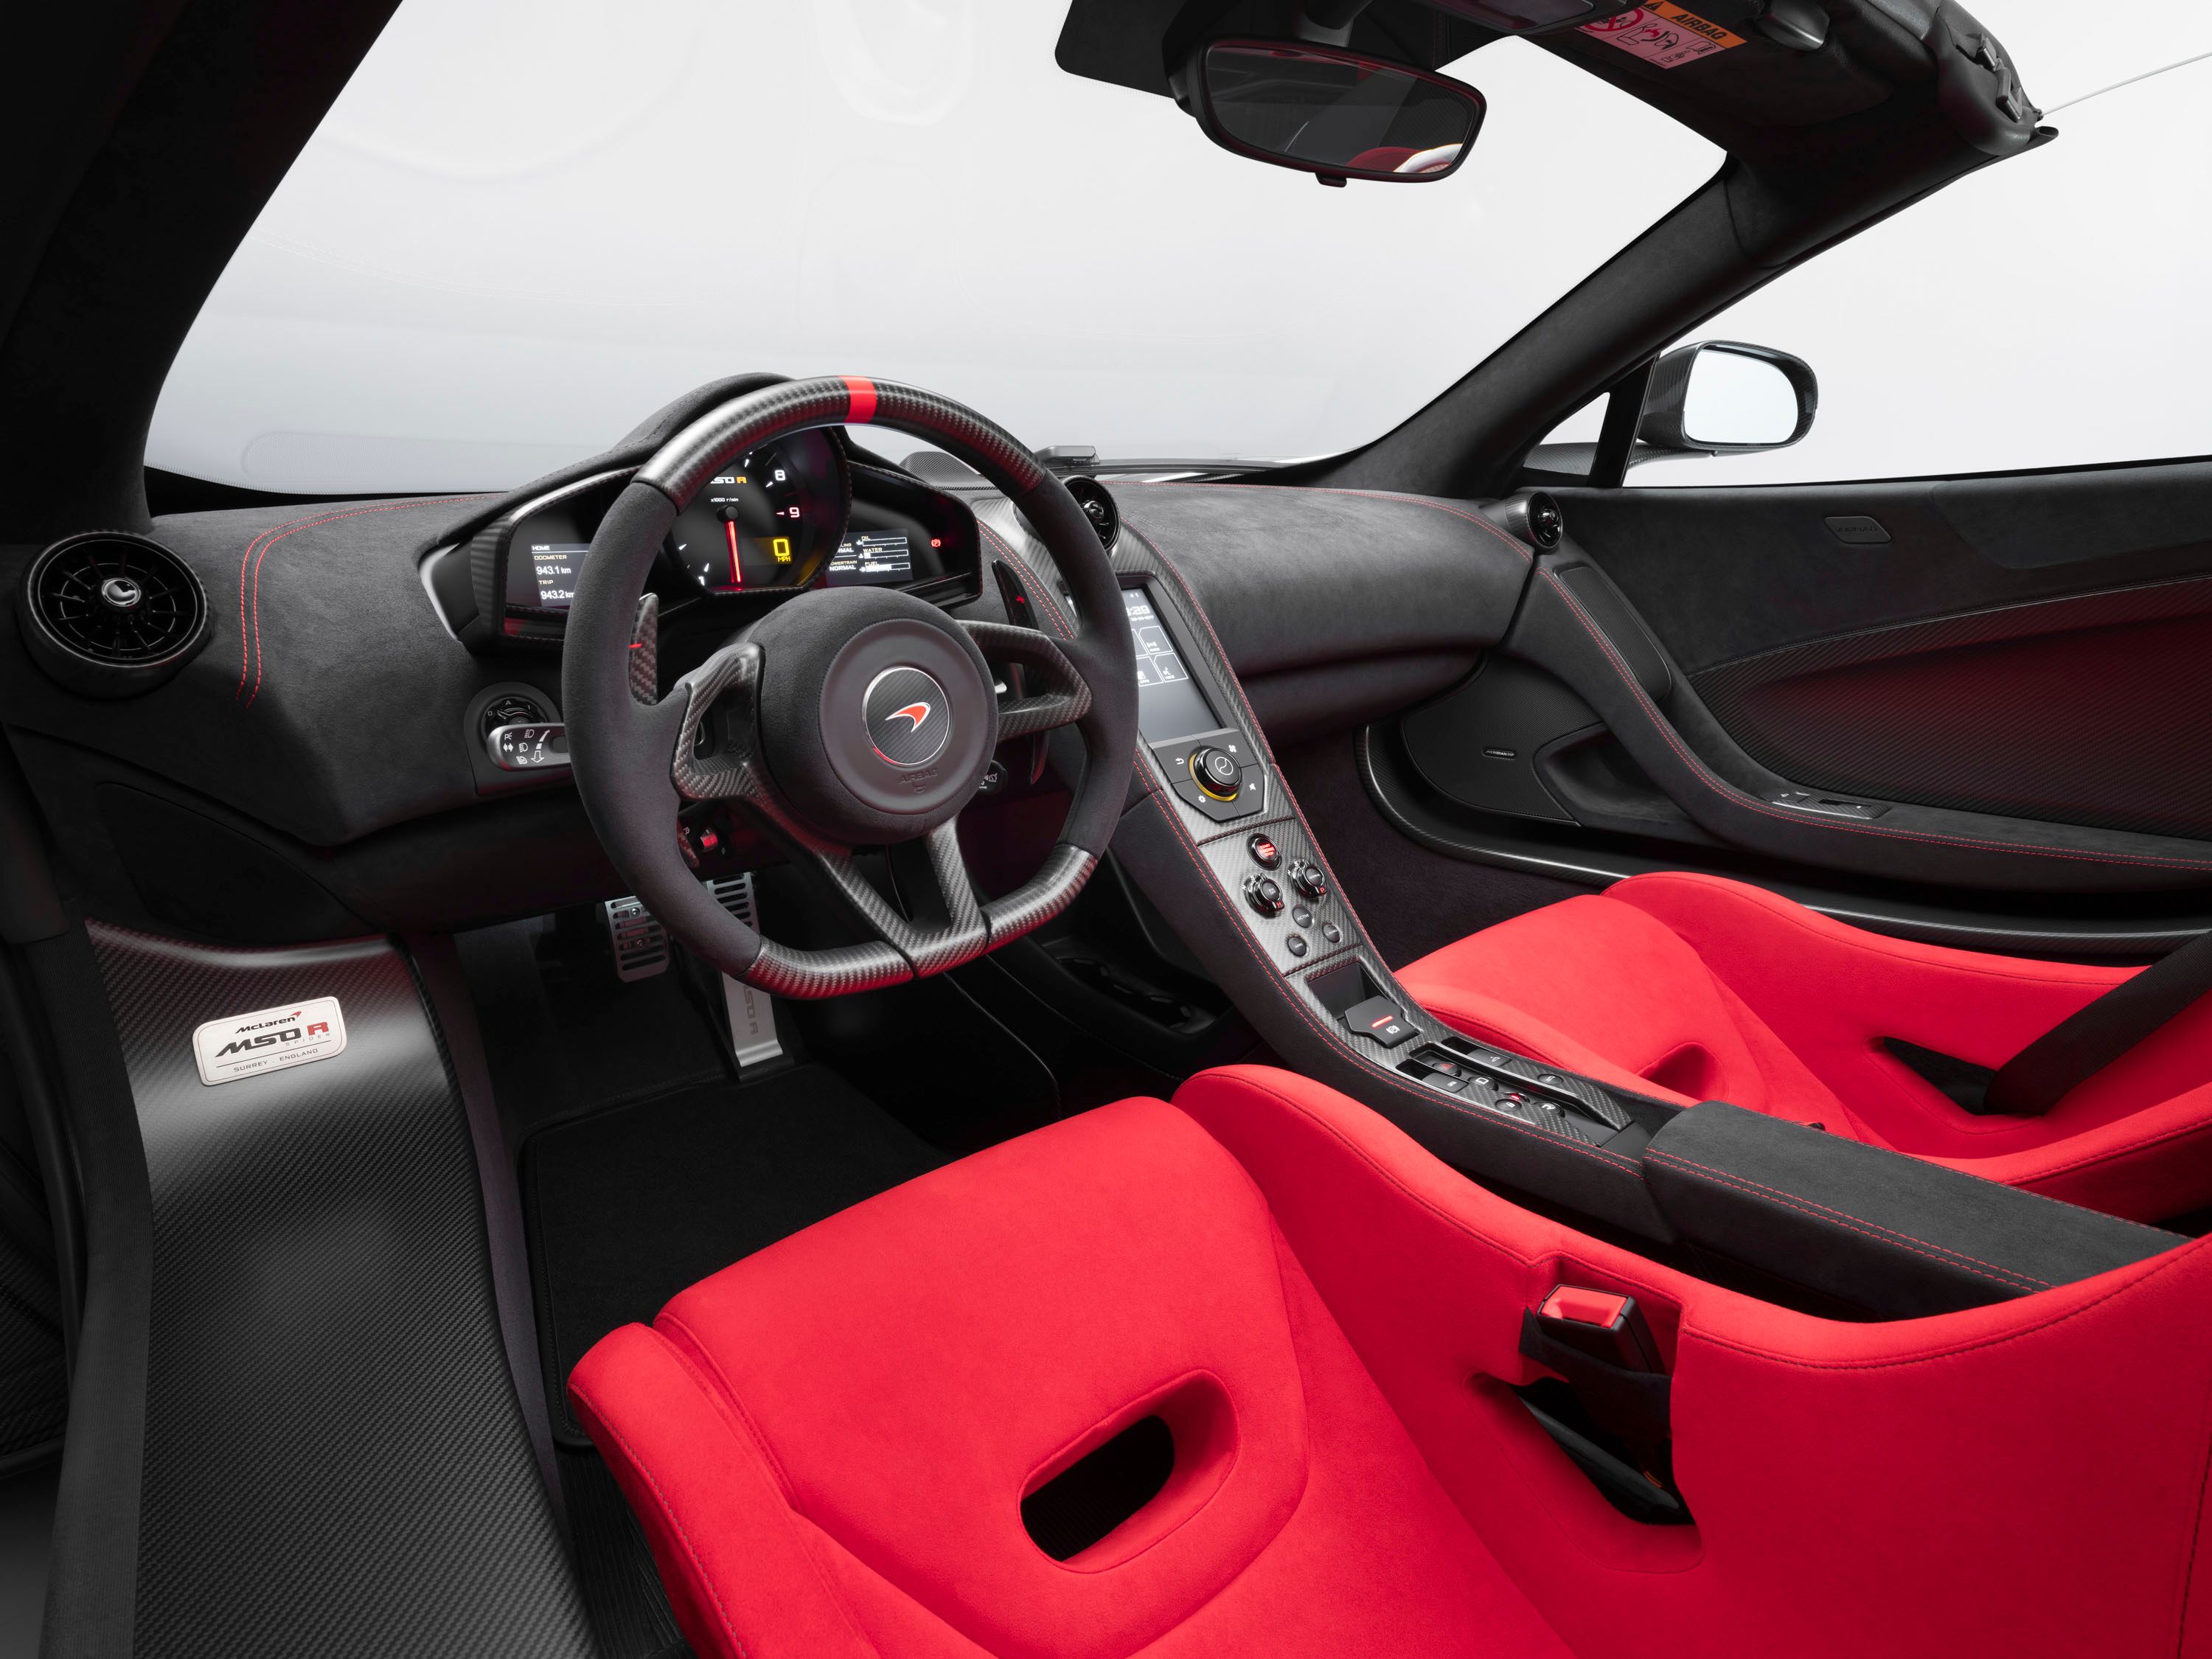 Updates continue in the interior, where MSO added black Alcantara with red stitching